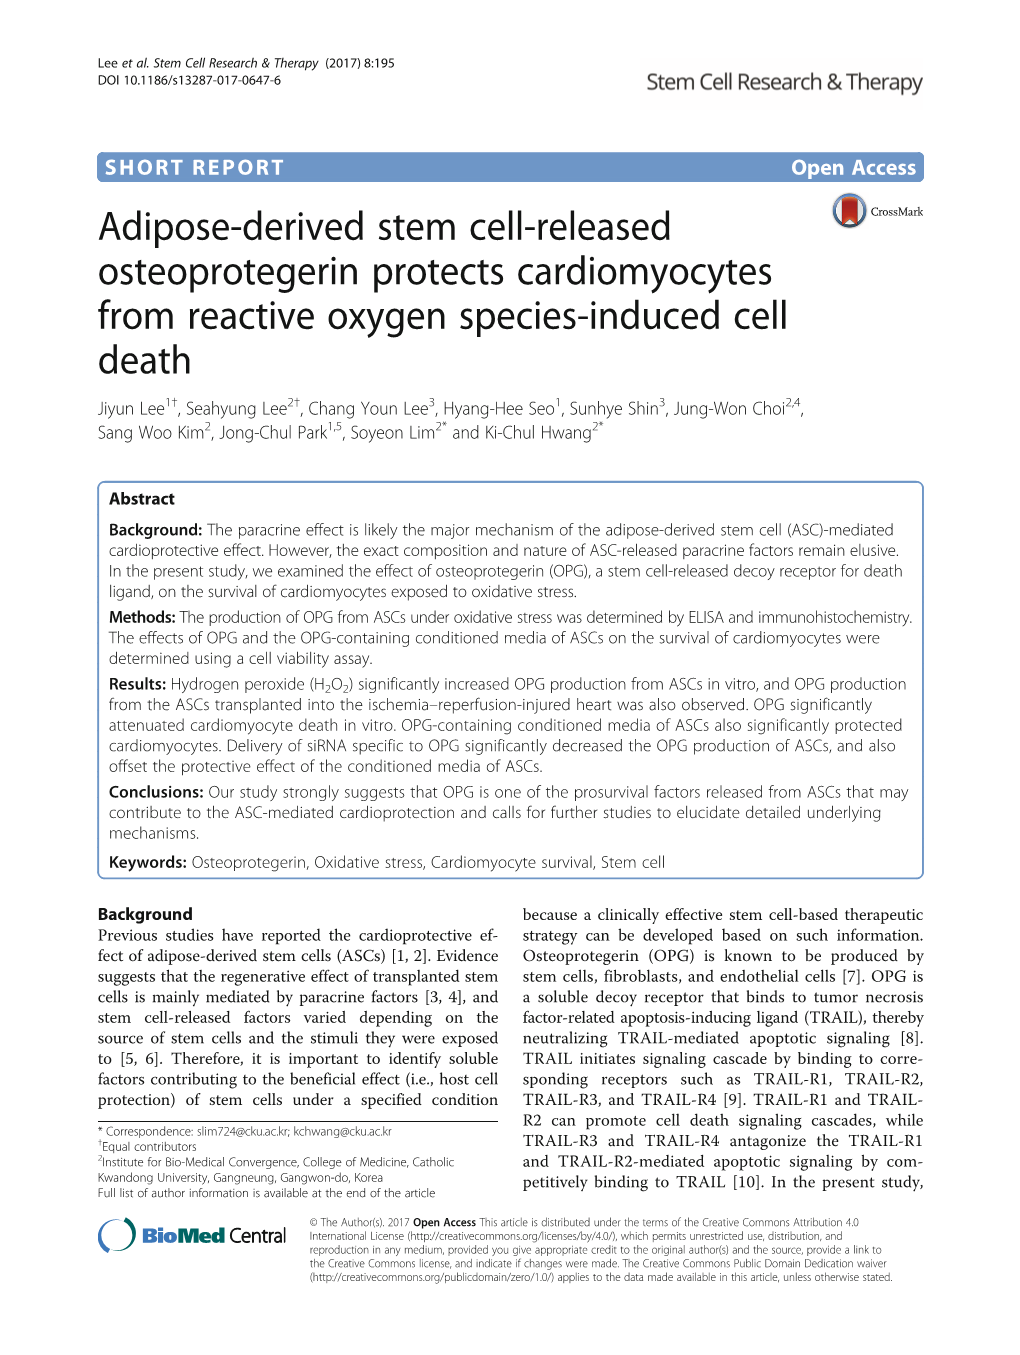 Adipose-Derived Stem Cell-Released Osteoprotegerin Protects